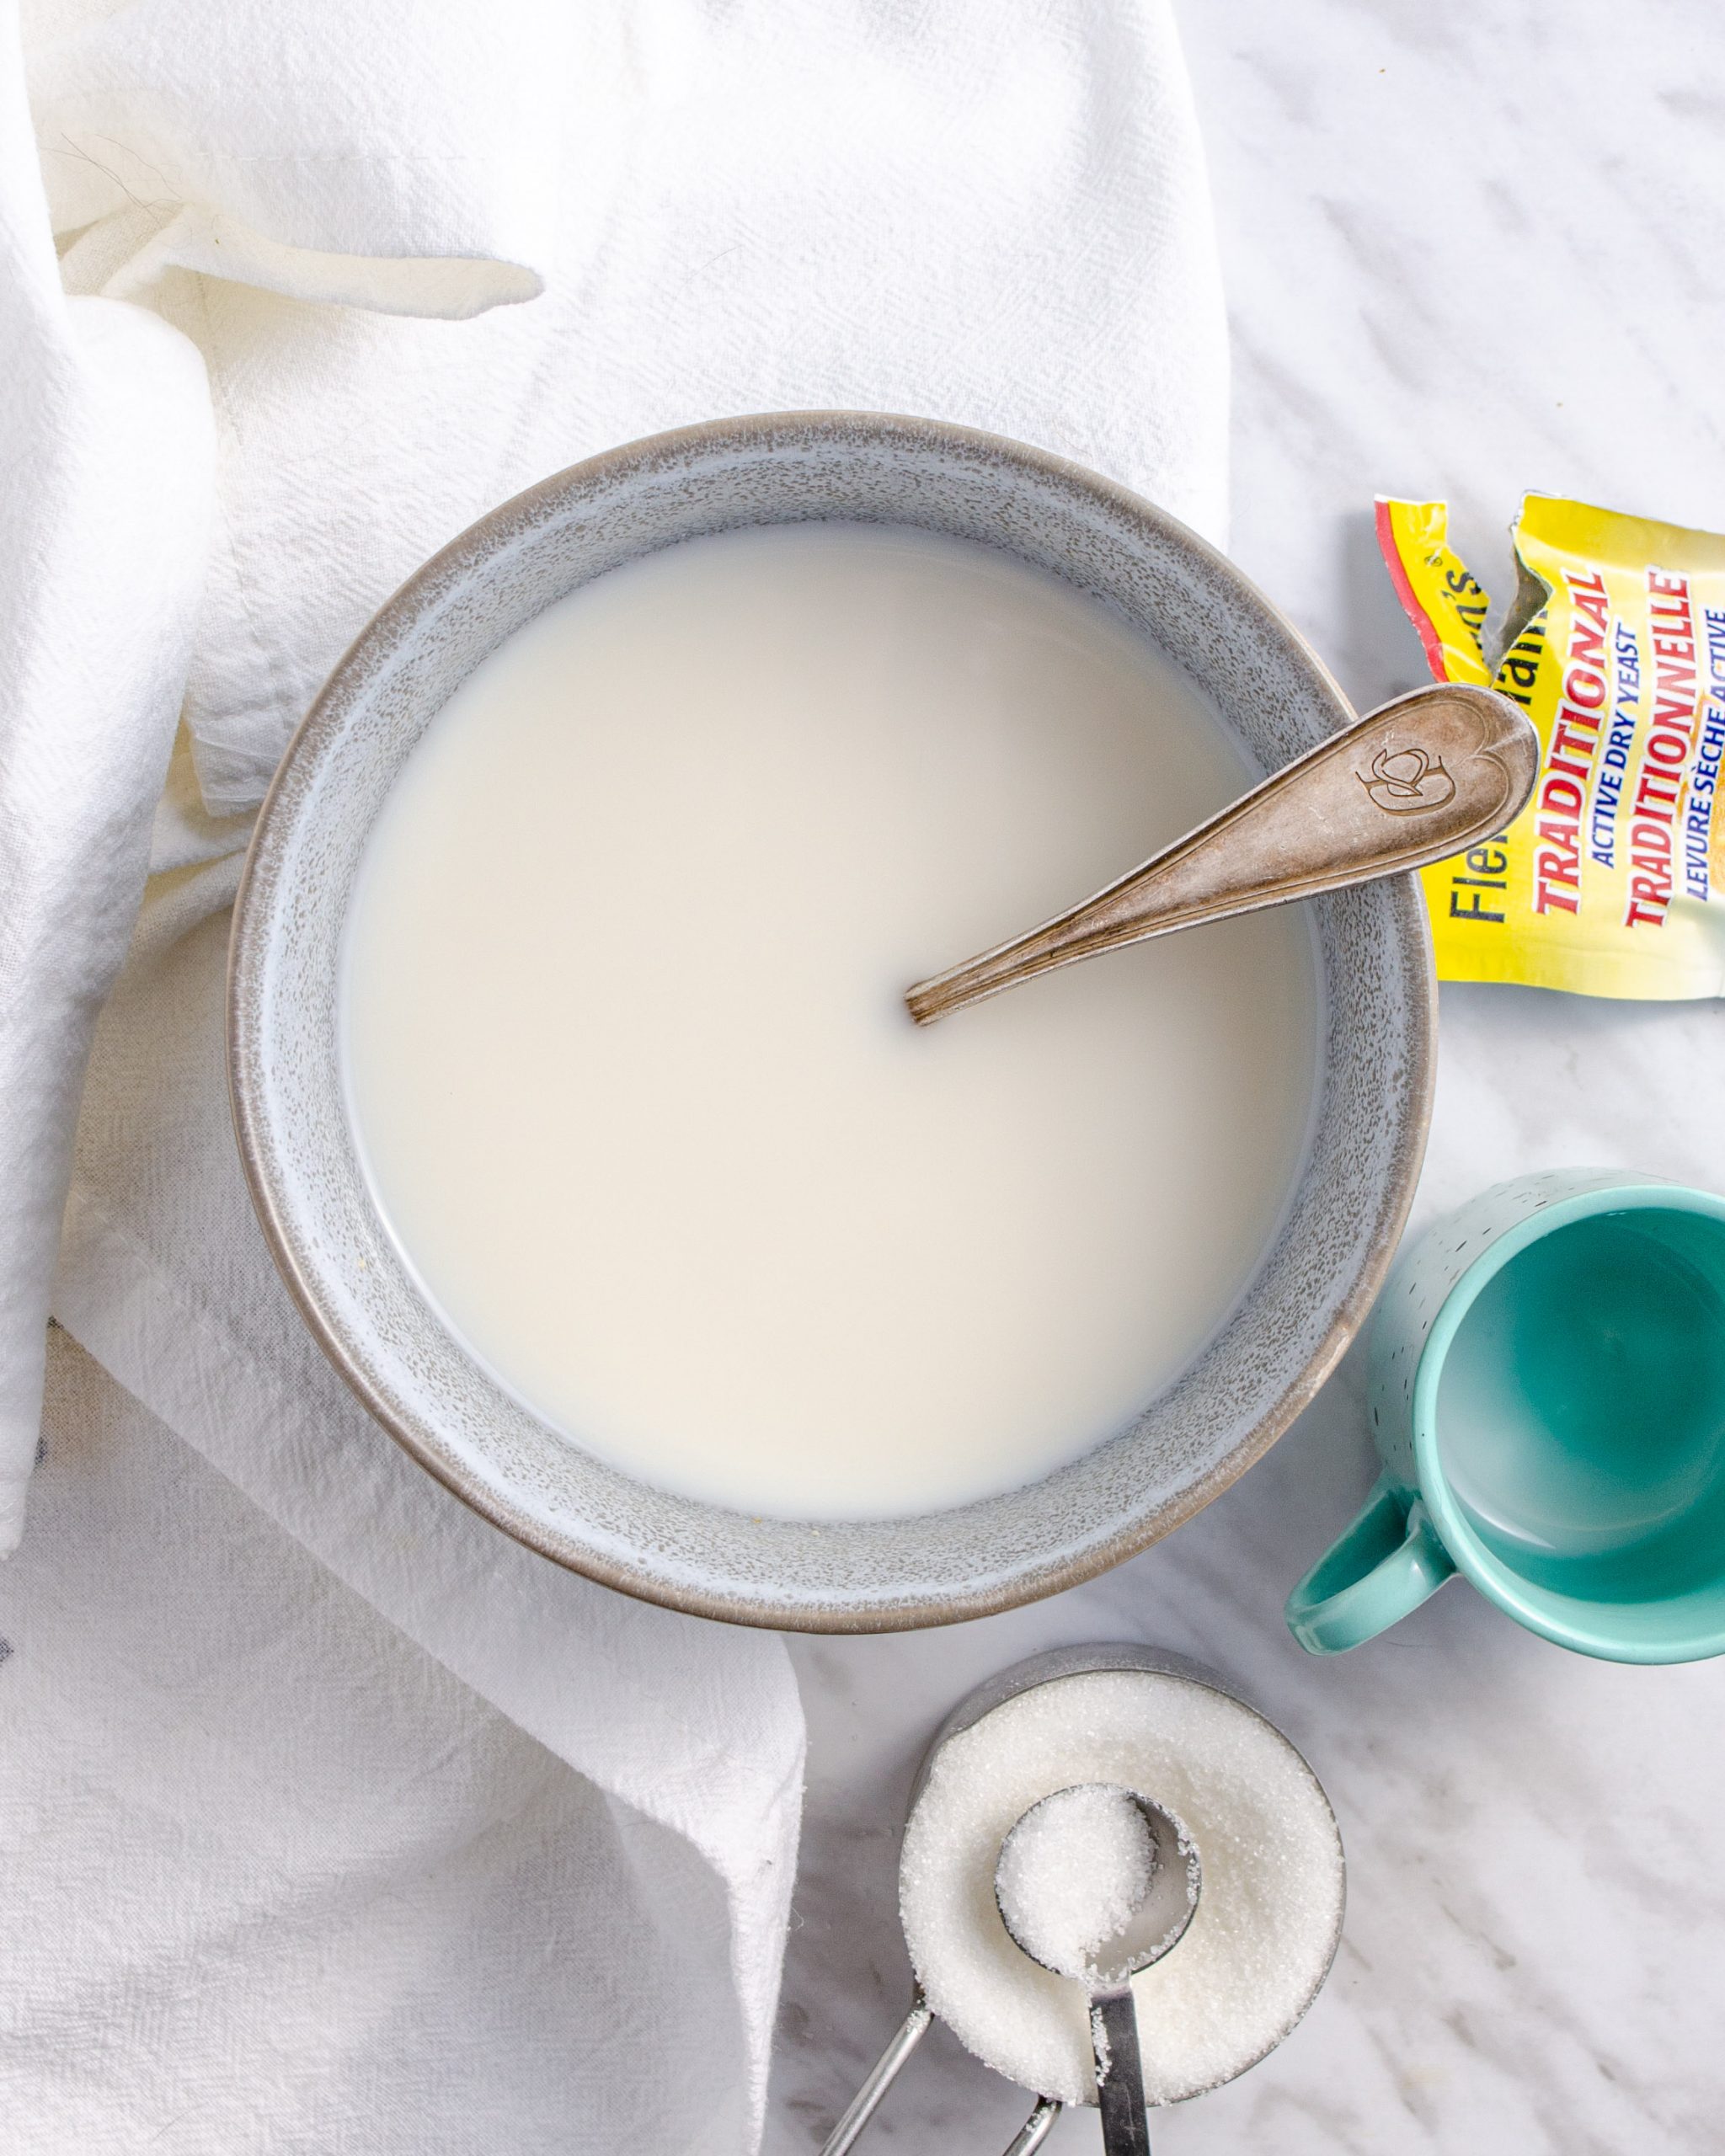 Place the boiling water, 1 tsp. Sugar, yeast, and milk into a bowl, stir and allow to sit for 10 minutes untouched.